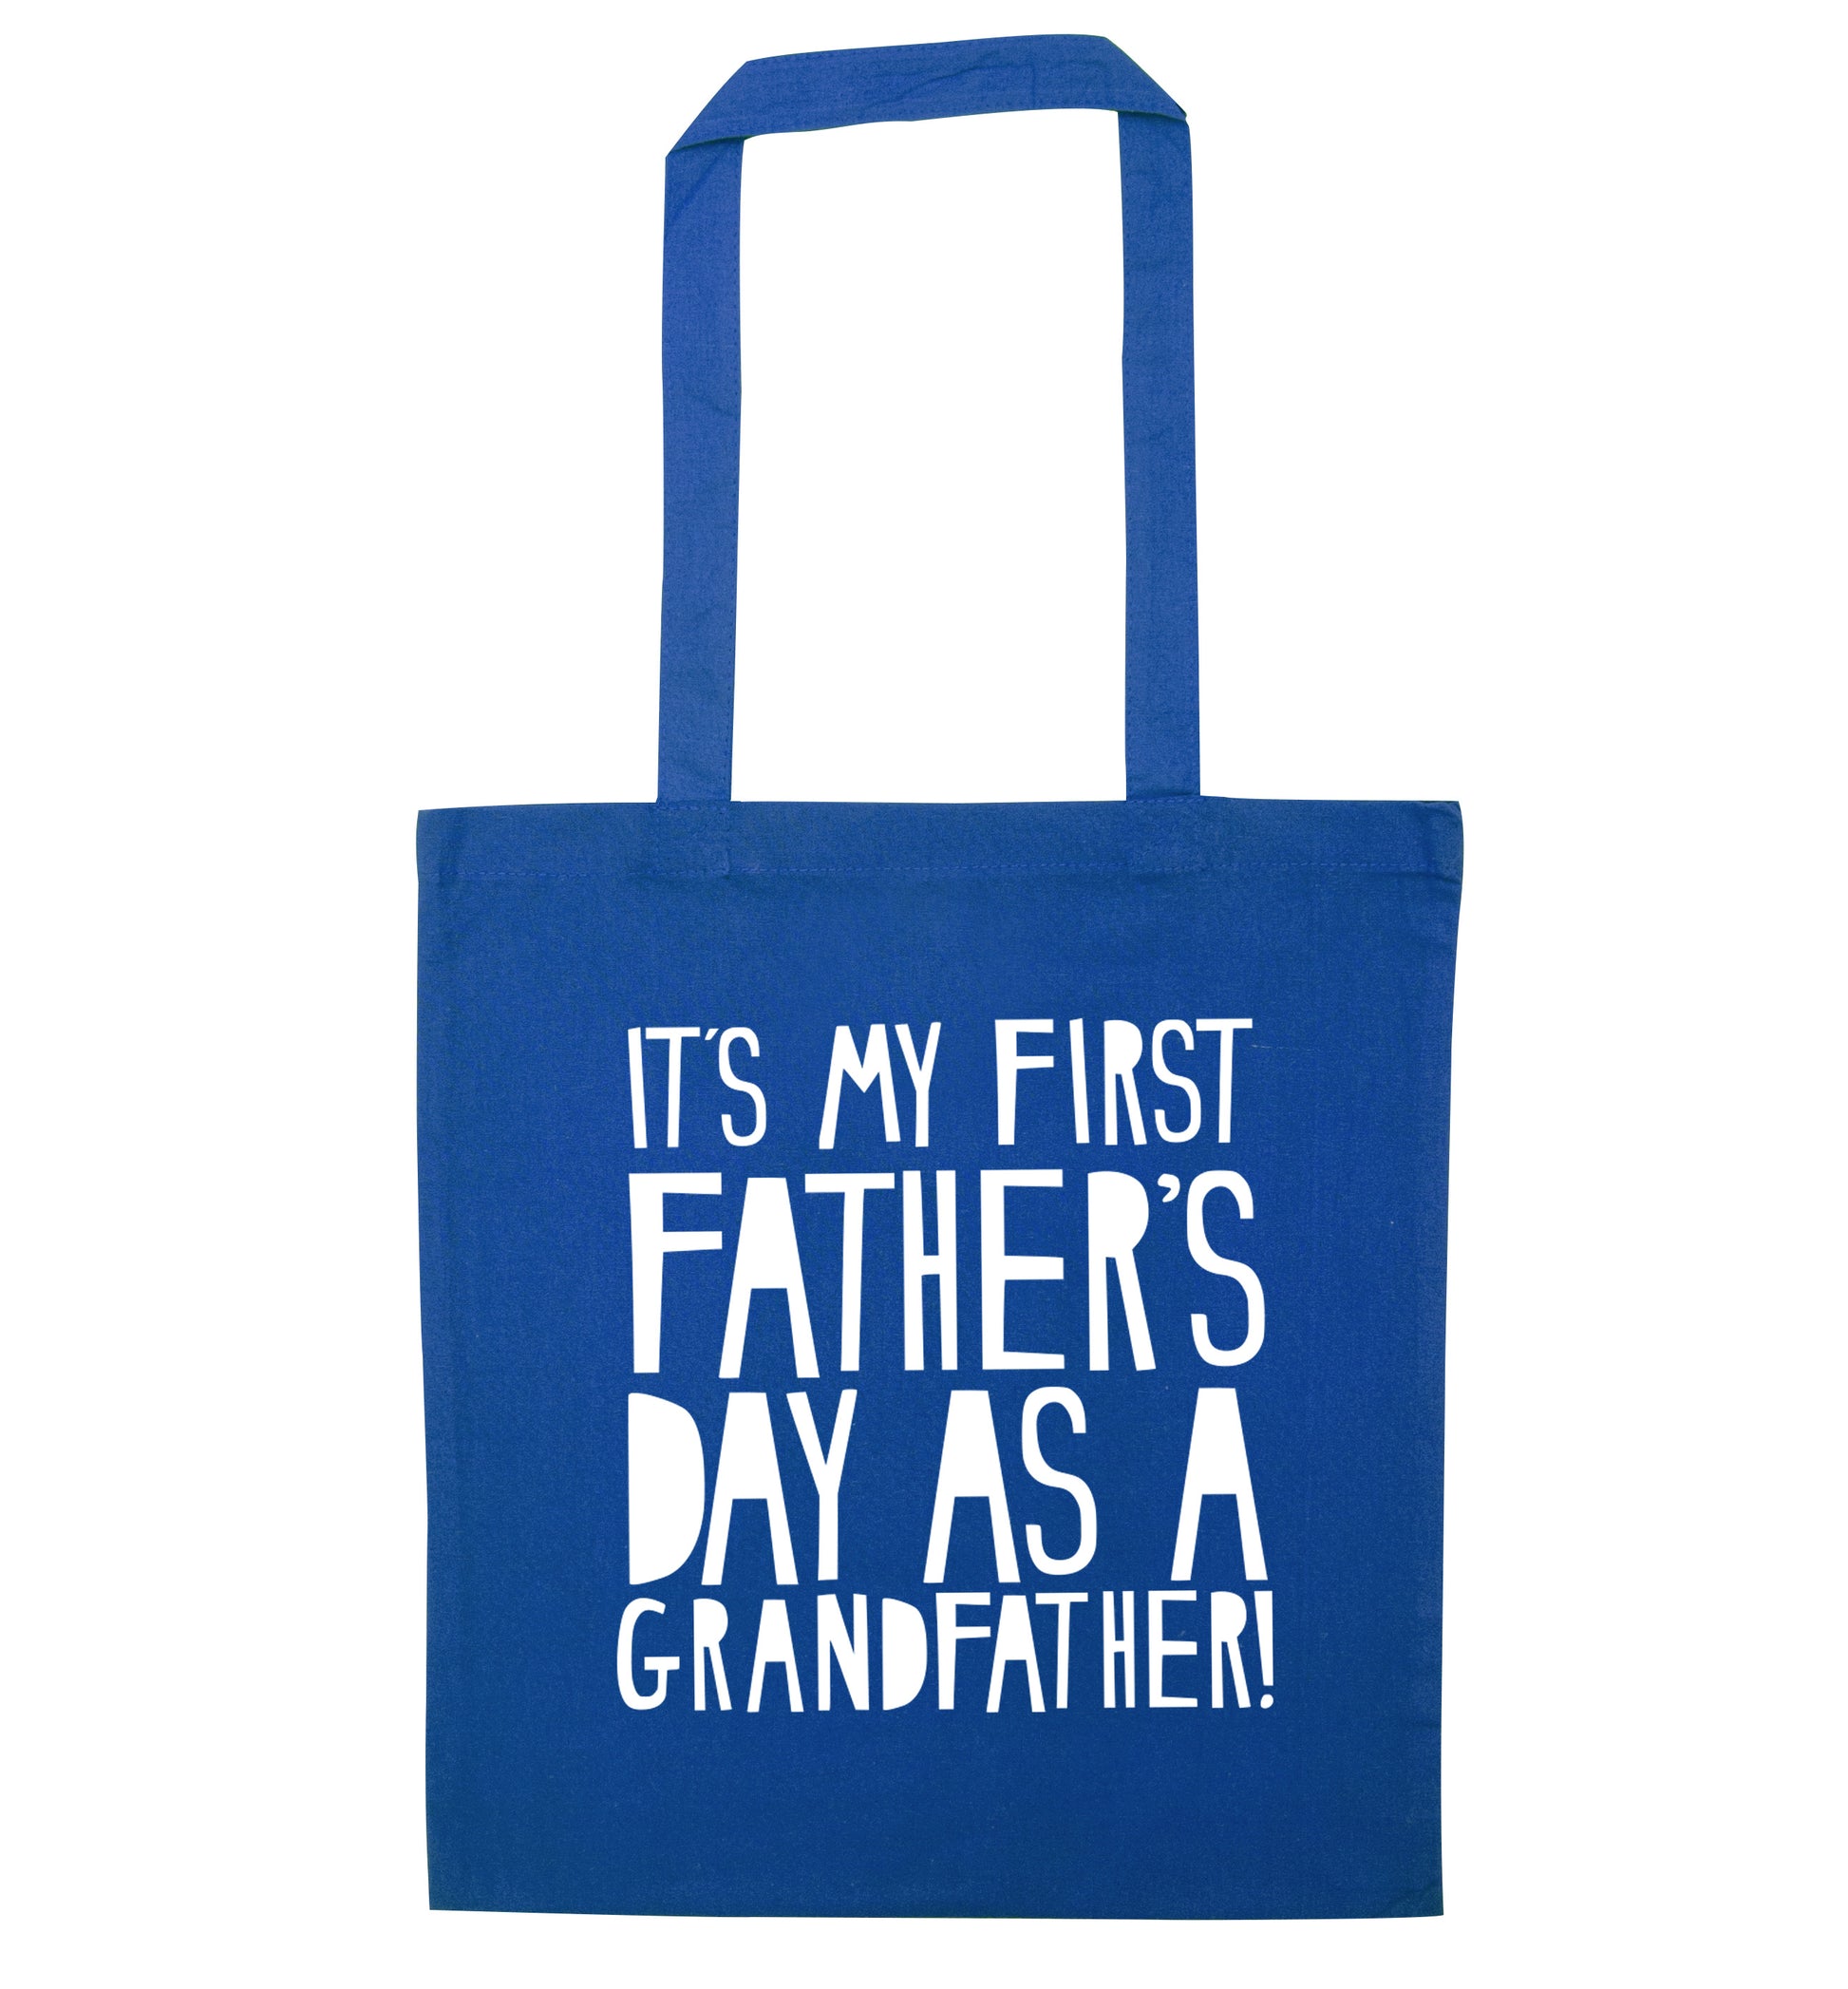 It's my first Father's Day as a Grandfather! blue tote bag